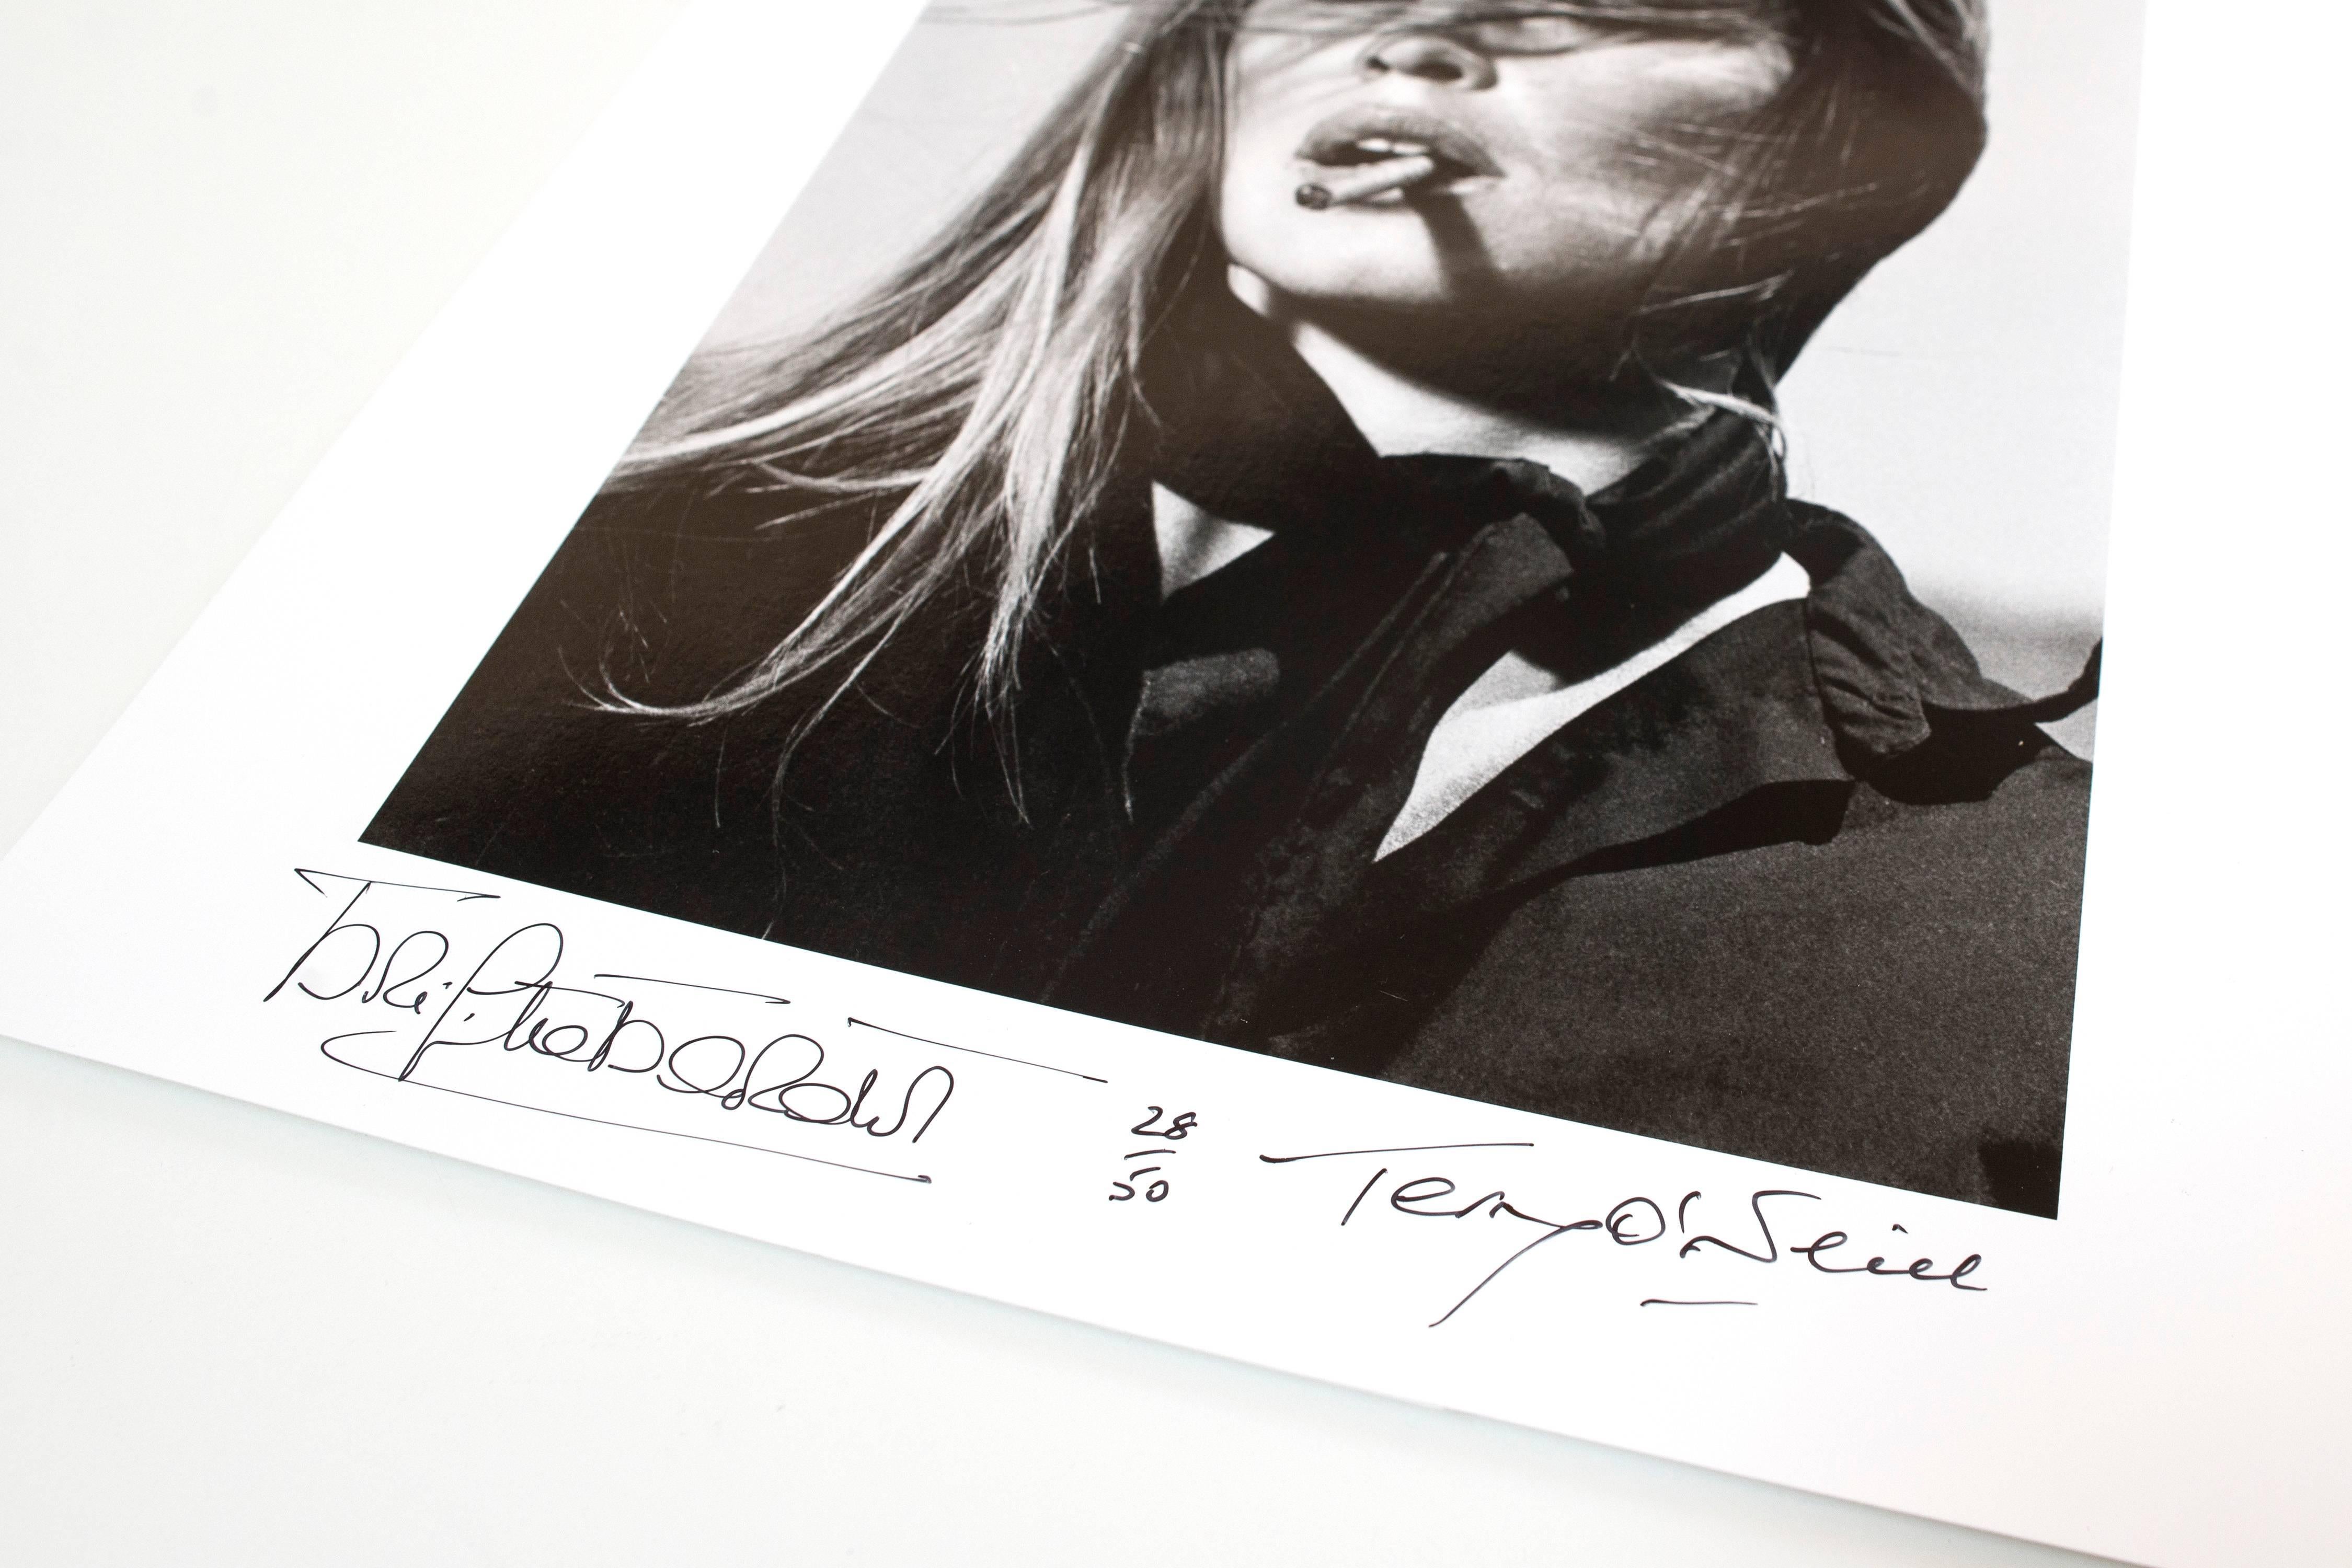 Co-Signed Brigitte Bardot with Cigar - Photograph by Terry O'Neill